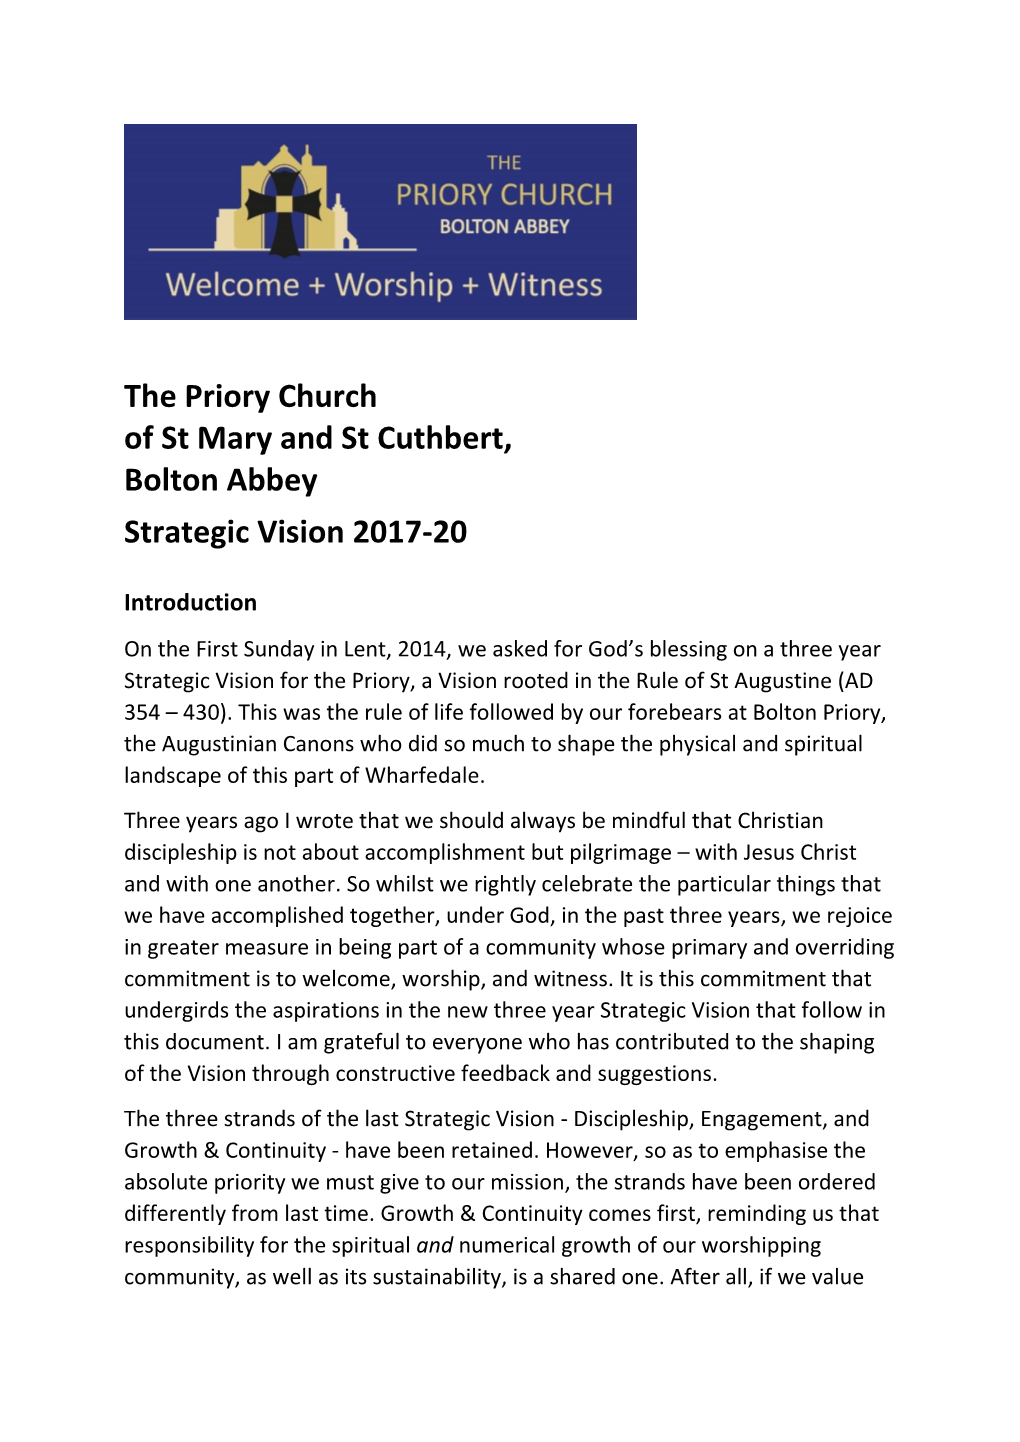 The Priory Church of St Mary and St Cuthbert, Bolton Abbey Strategic Vision 2017-20